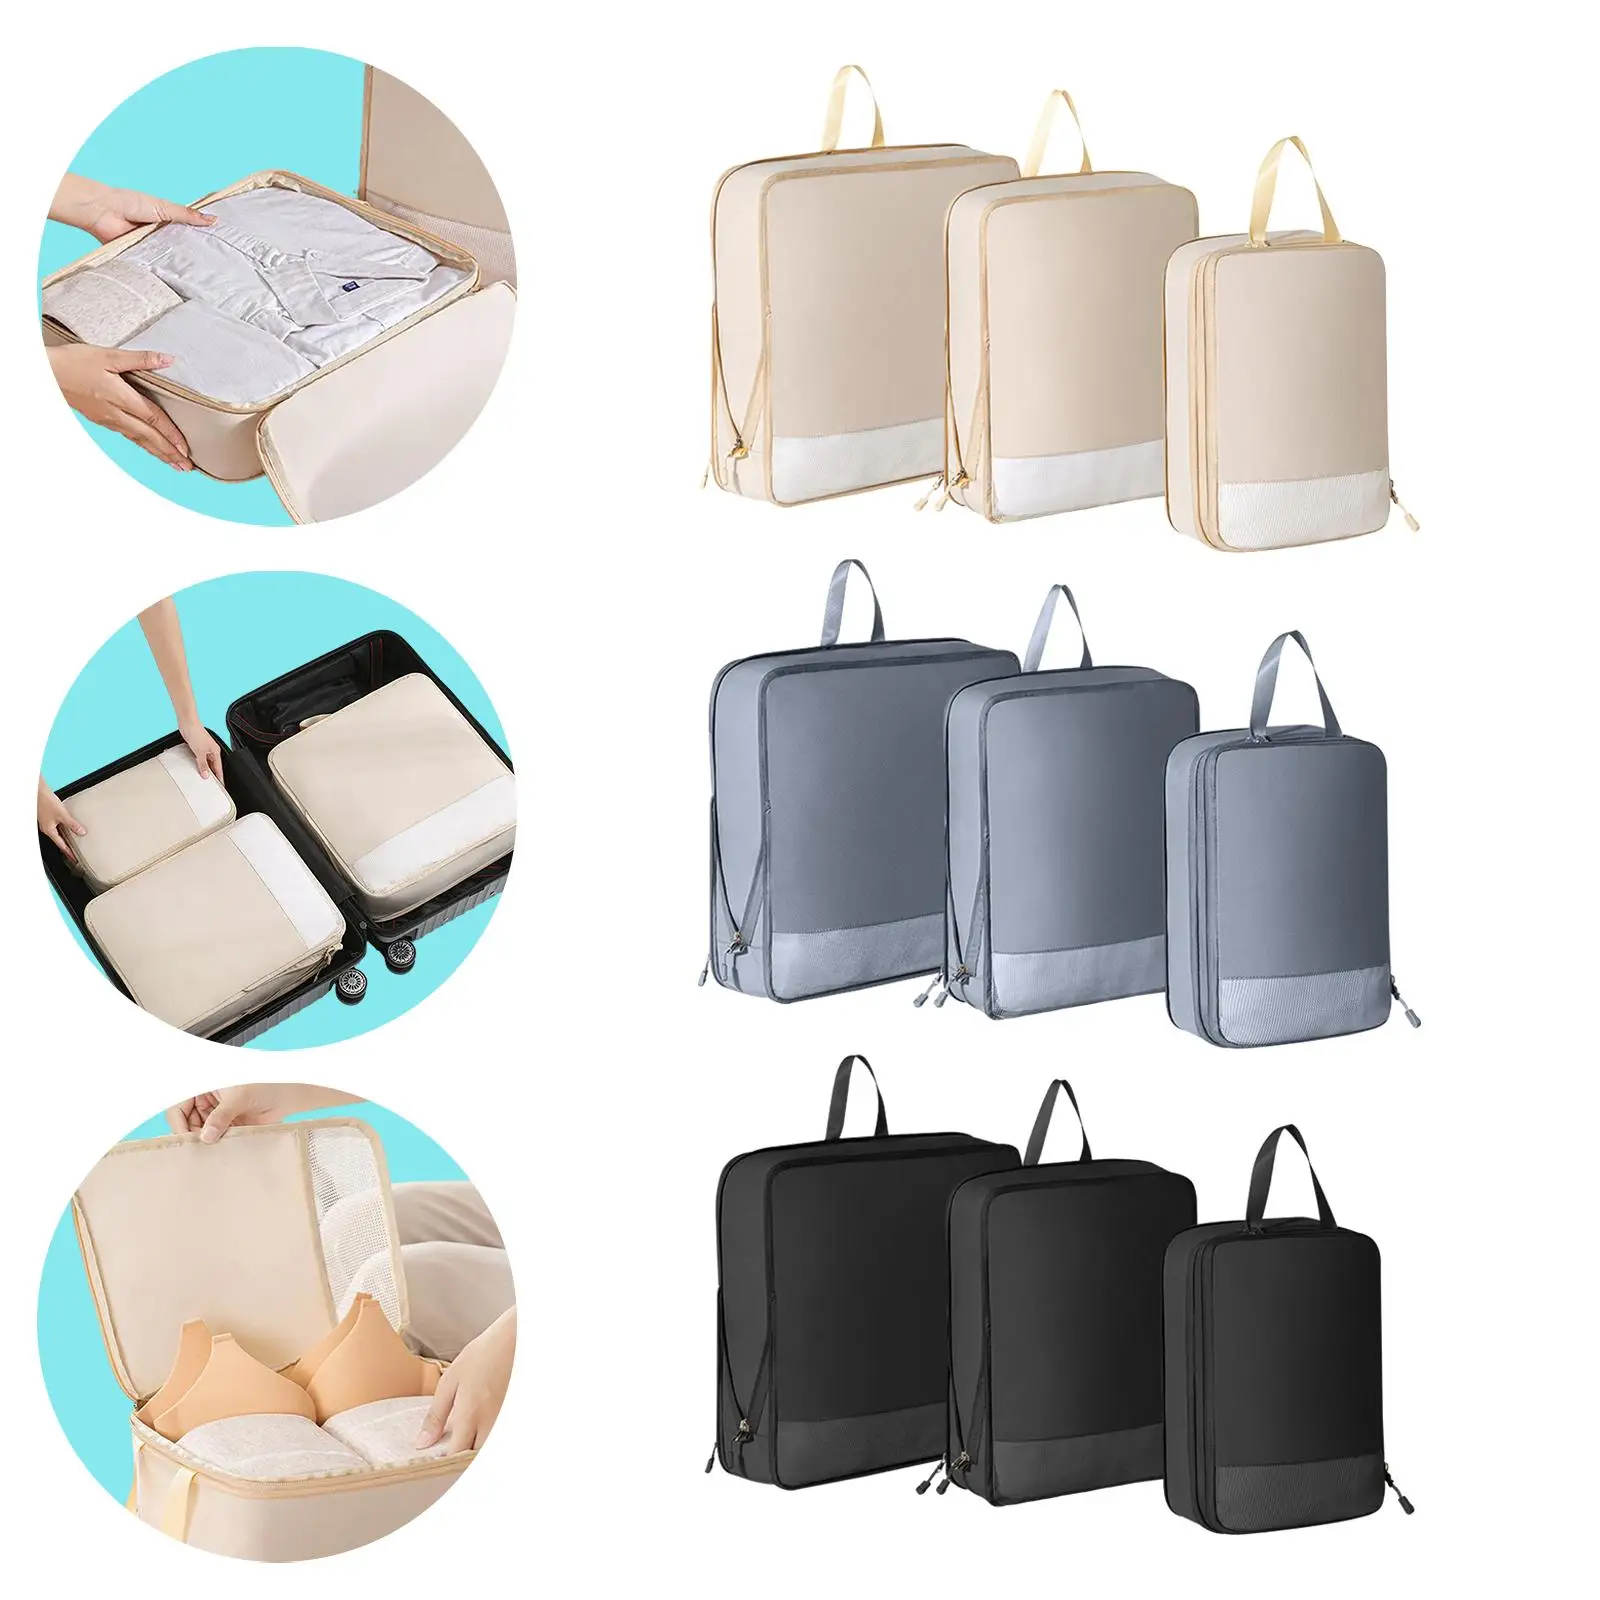 3x Compression Packing Cubes Lightweight Reusable Washable Machine Travel Clothes Packing Organizers for Vacations Daily Use